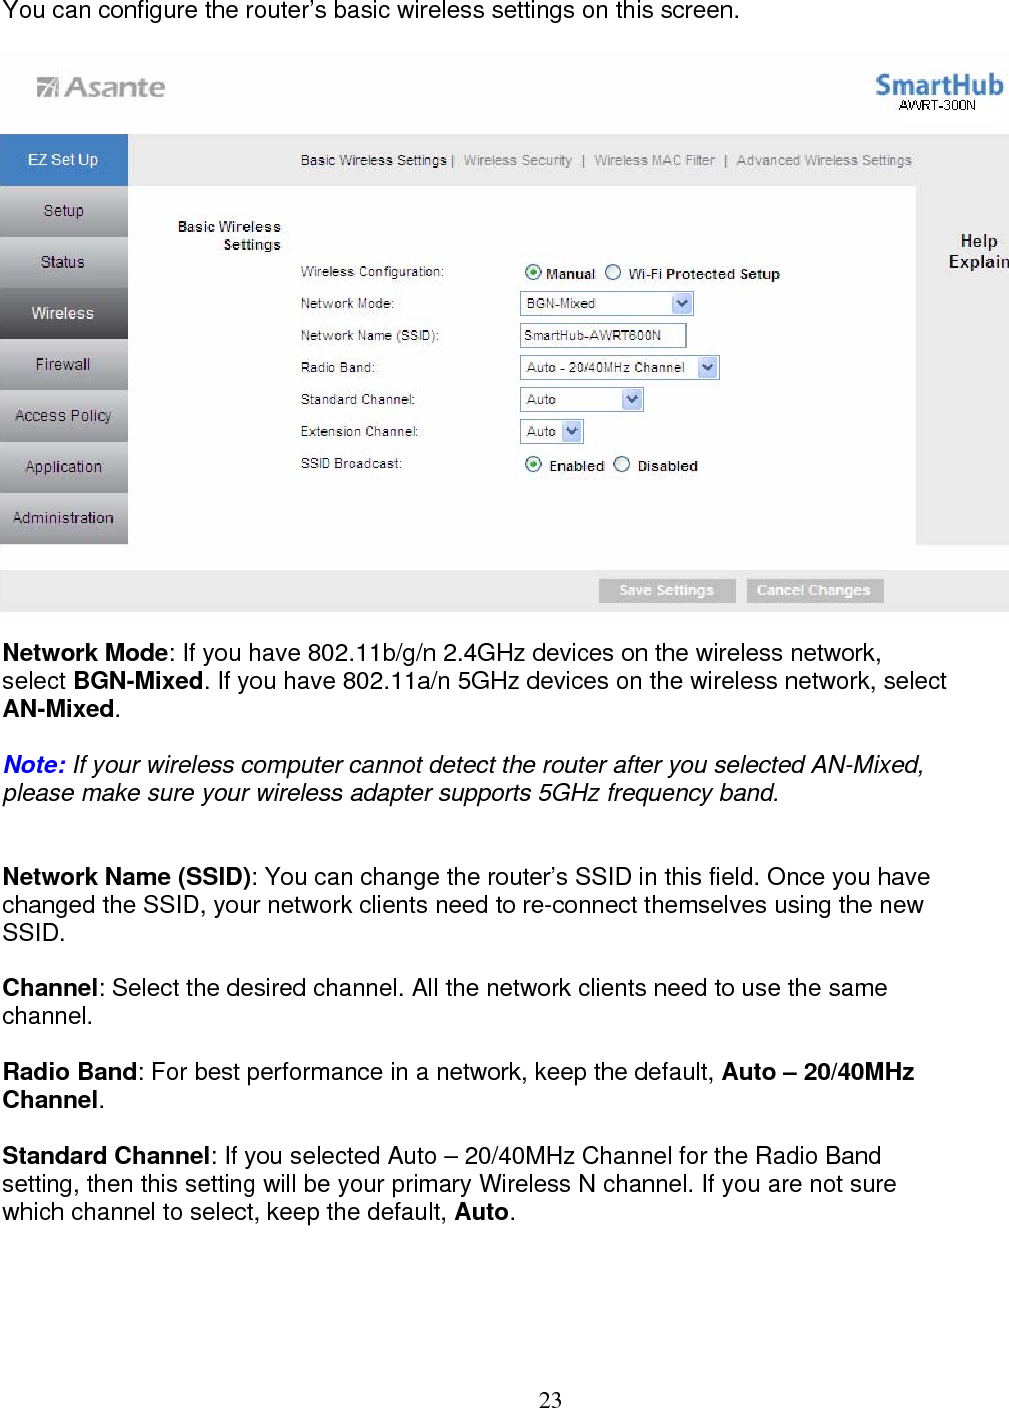  23  You can configure the router’s basic wireless settings on this screen.                       Network Mode: If you have 802.11b/g/n 2.4GHz devices on the wireless network,  select BGN-Mixed. If you have 802.11a/n 5GHz devices on the wireless network, select  AN-Mixed.  Note: If your wireless computer cannot detect the router after you selected AN-Mixed, please make sure your wireless adapter supports 5GHz frequency band.  Network Name (SSID): You can change the router’s SSID in this field. Once you have  changed the SSID, your network clients need to re-connect themselves using the new  SSID.  Channel: Select the desired channel. All the network clients need to use the same channel.  Radio Band: For best performance in a network, keep the default, Auto – 20/40MHz  Channel.  Standard Channel: If you selected Auto – 20/40MHz Channel for the Radio Band  setting, then this setting will be your primary Wireless N channel. If you are not sure which channel to select, keep the default, Auto.     